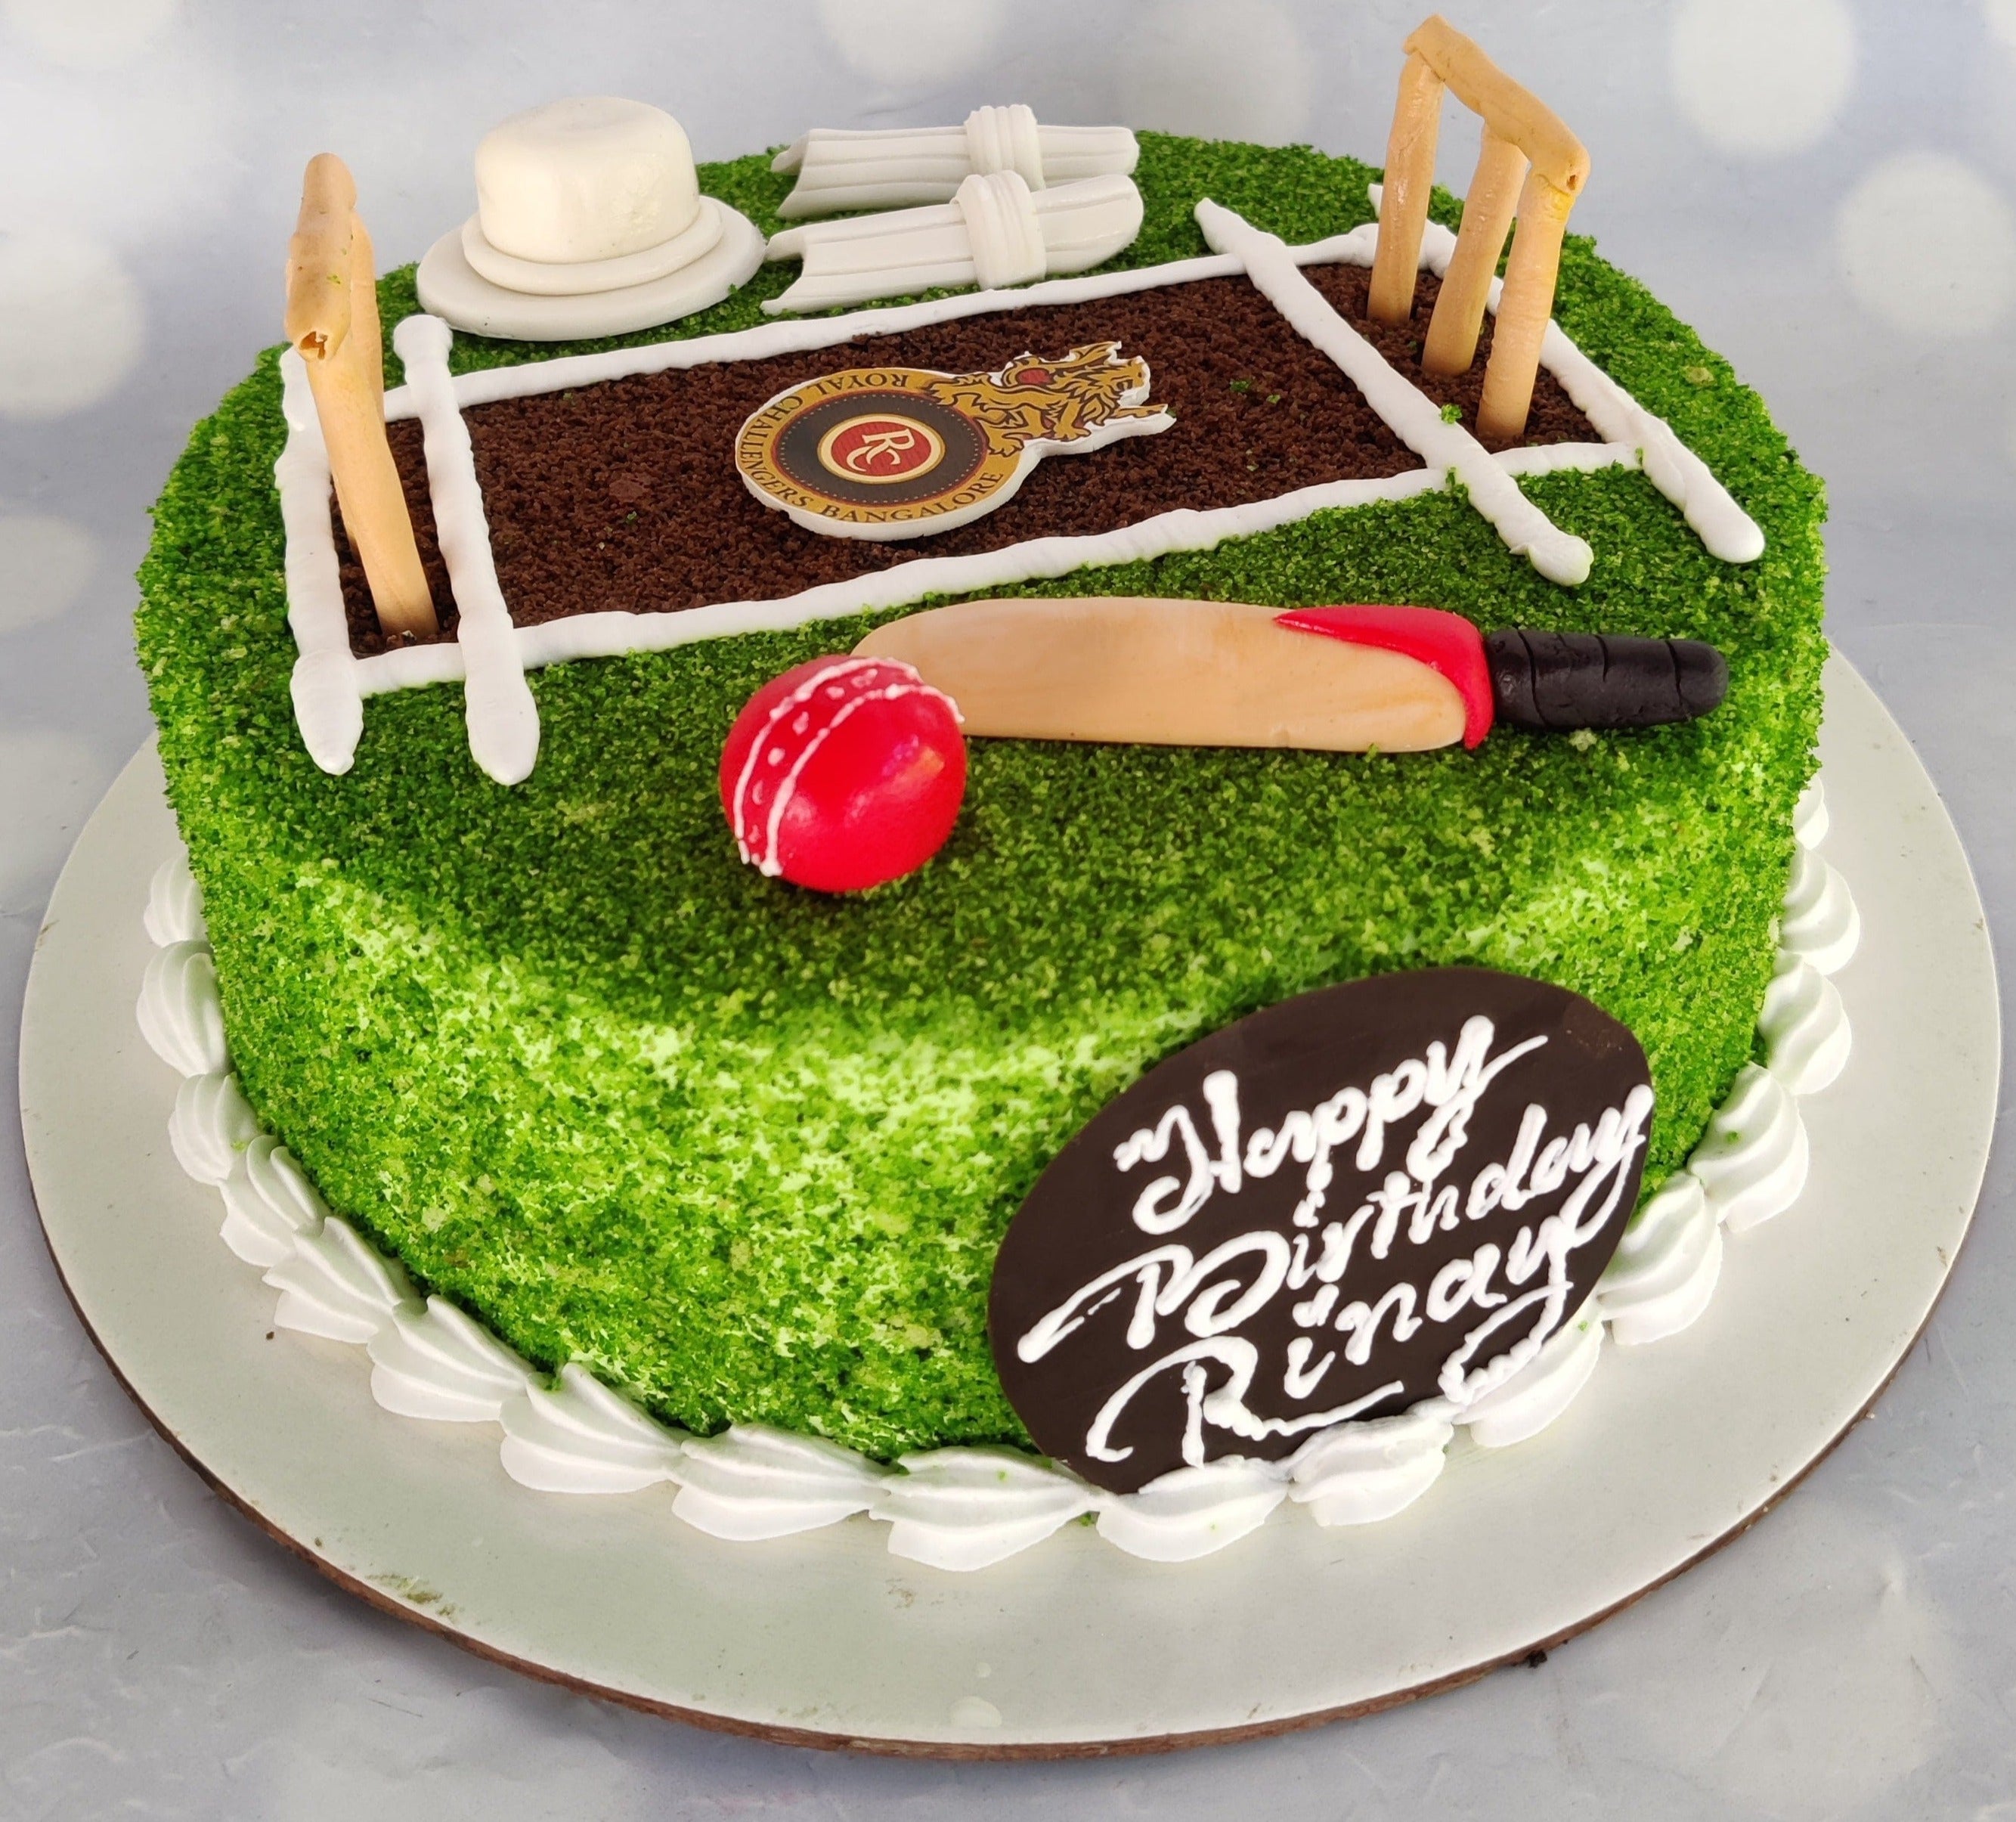 Details more than 81 indian cricket cake - in.daotaonec